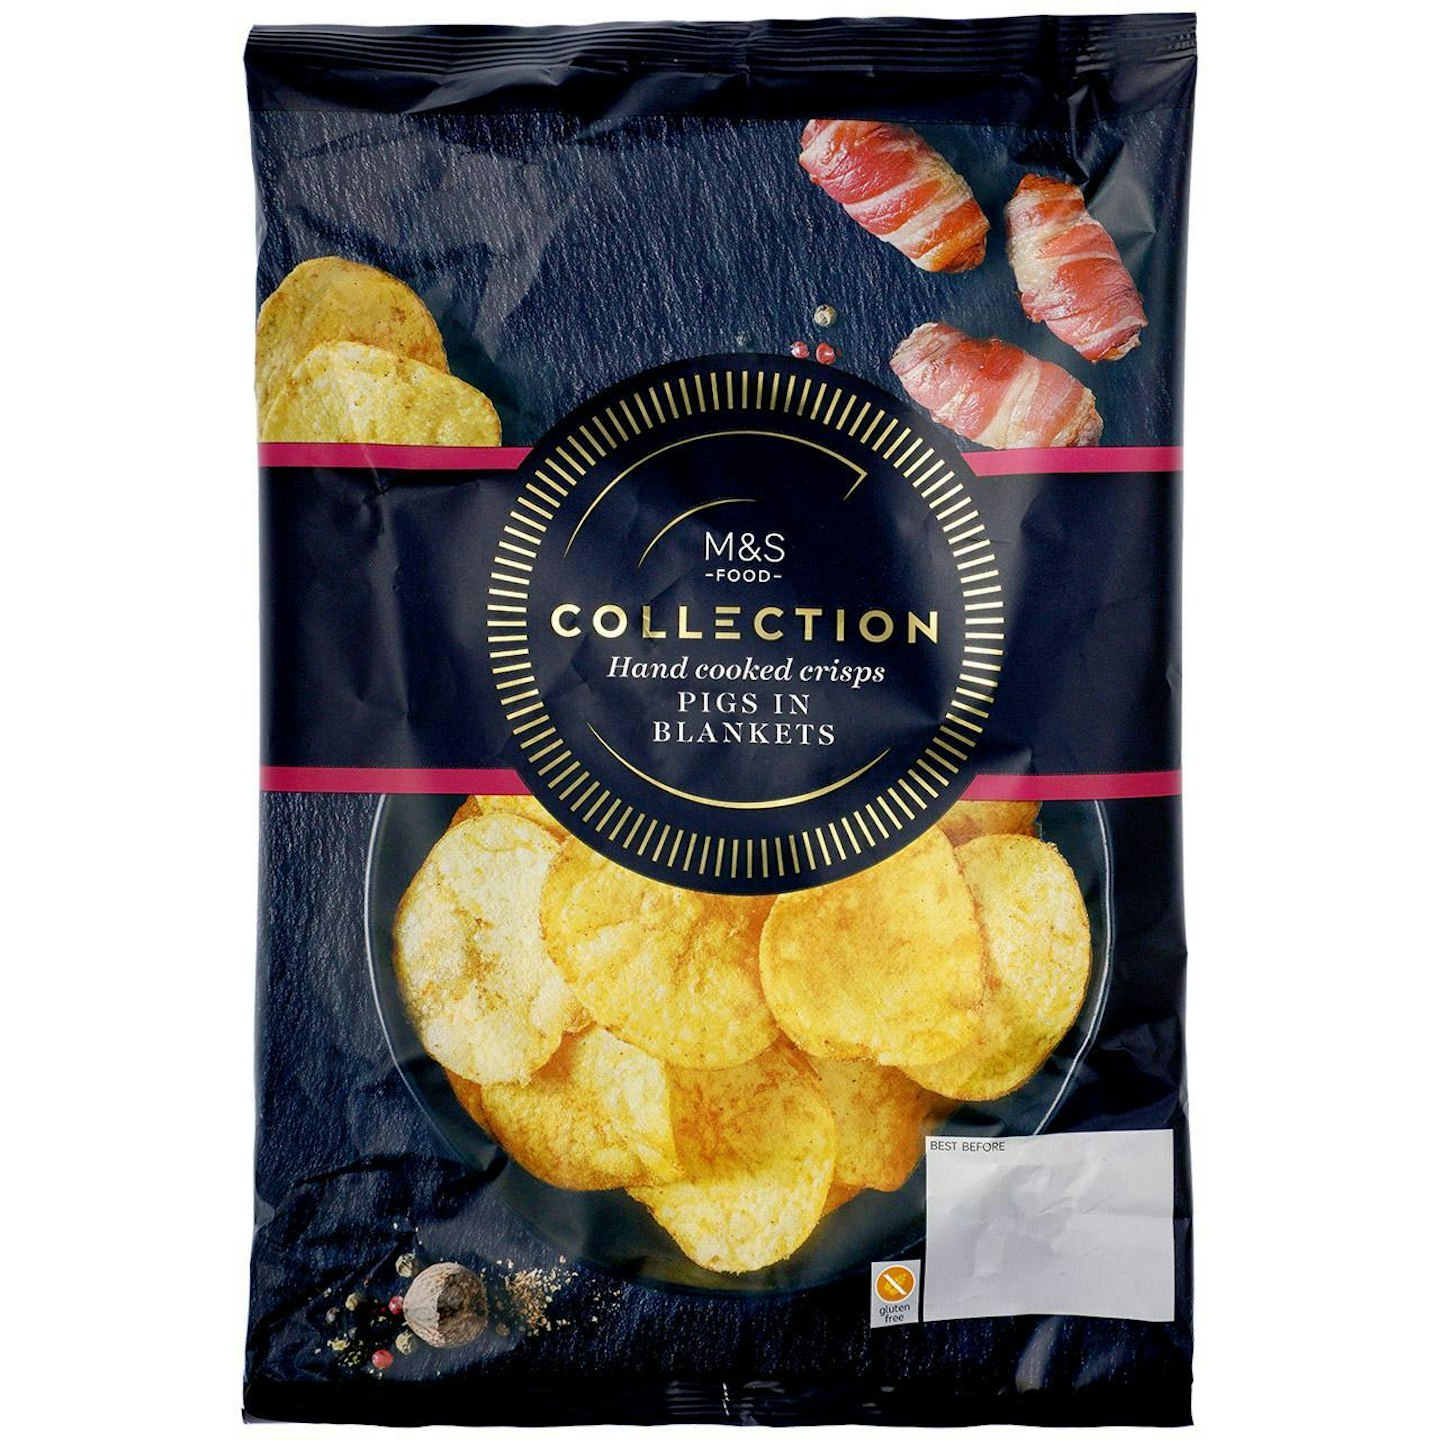 M&S Collection Pigs in Blankets Hand Cooked Crisps, £1.75